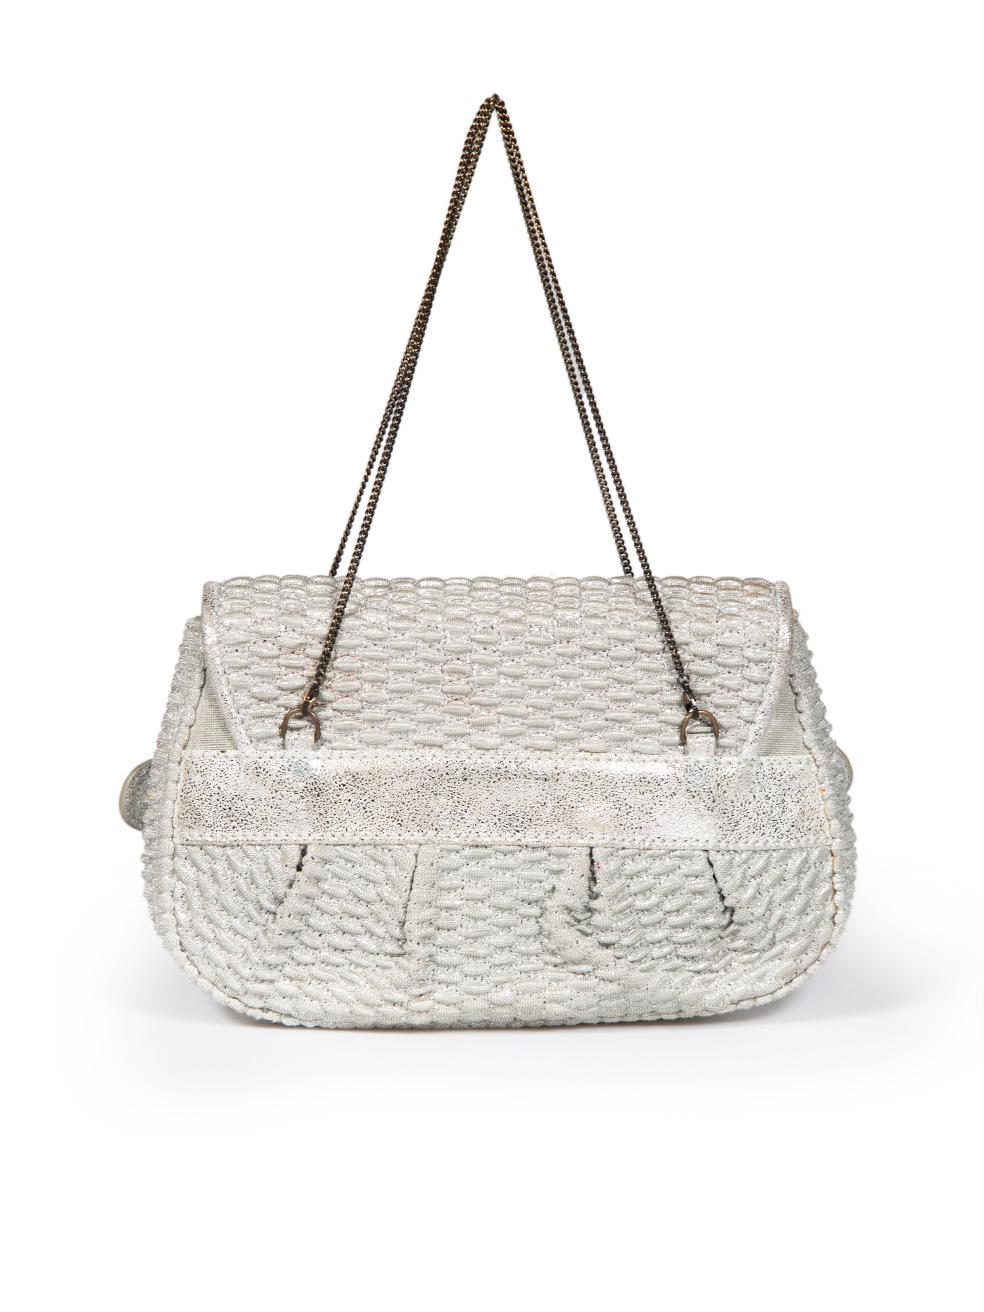 Fendi Silver Textured Mini B Bis Bag In Good Condition For Sale In London, GB